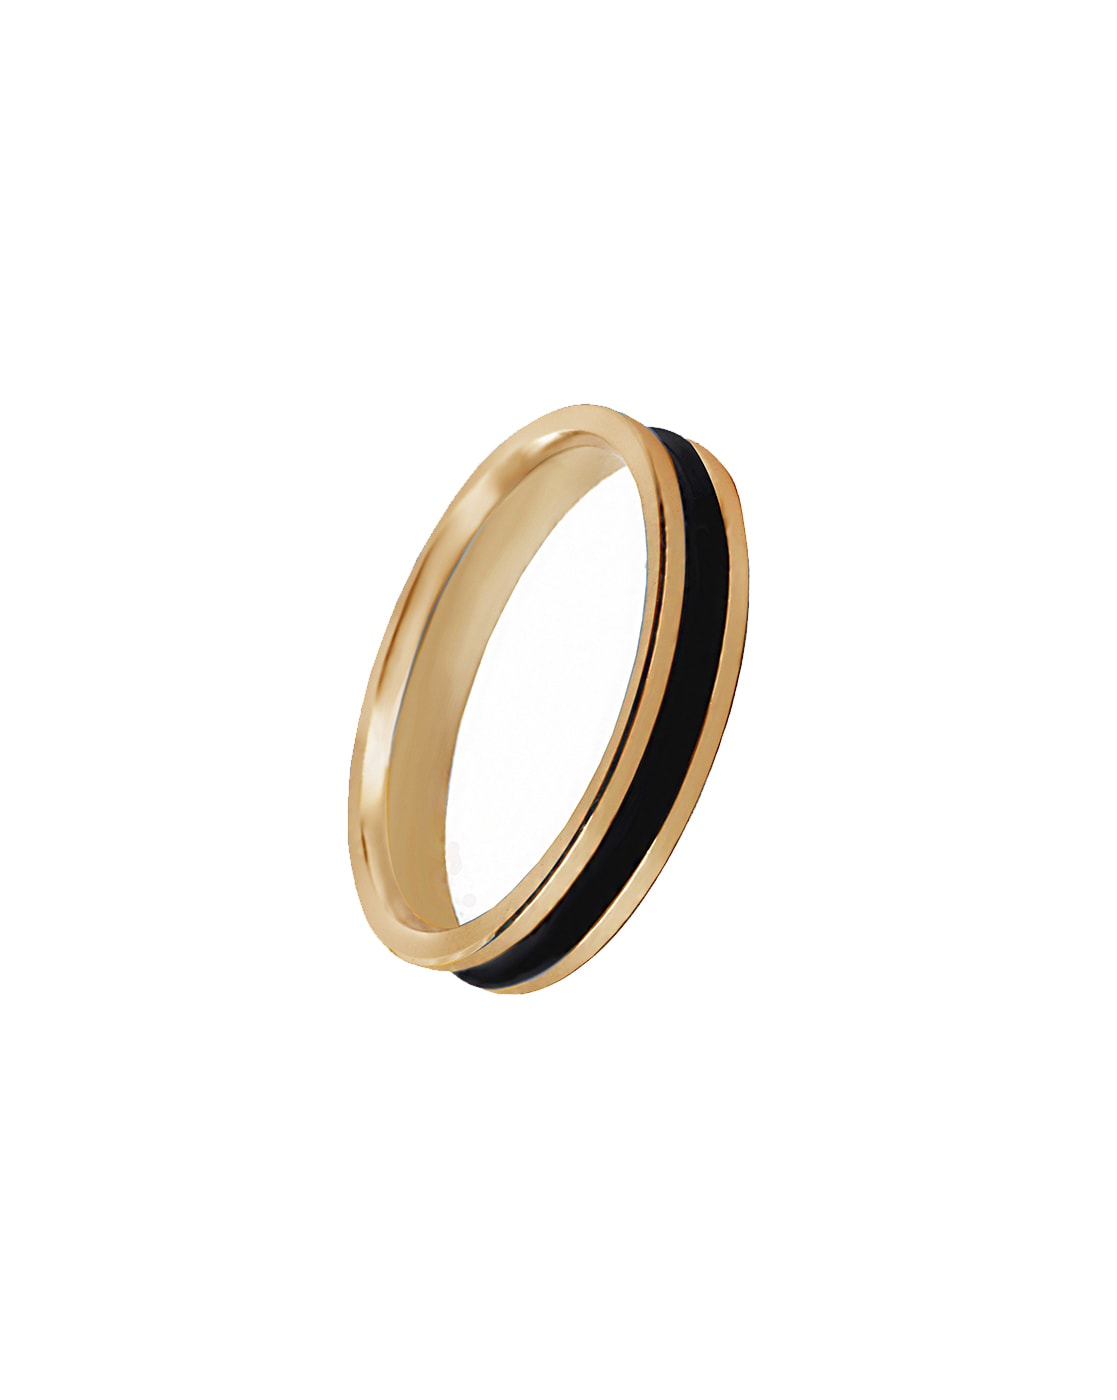 Men's Matte Black Tail Ring Stainless Steel Gold Line Edge & Unique Black  Brushed Surface - Etsy